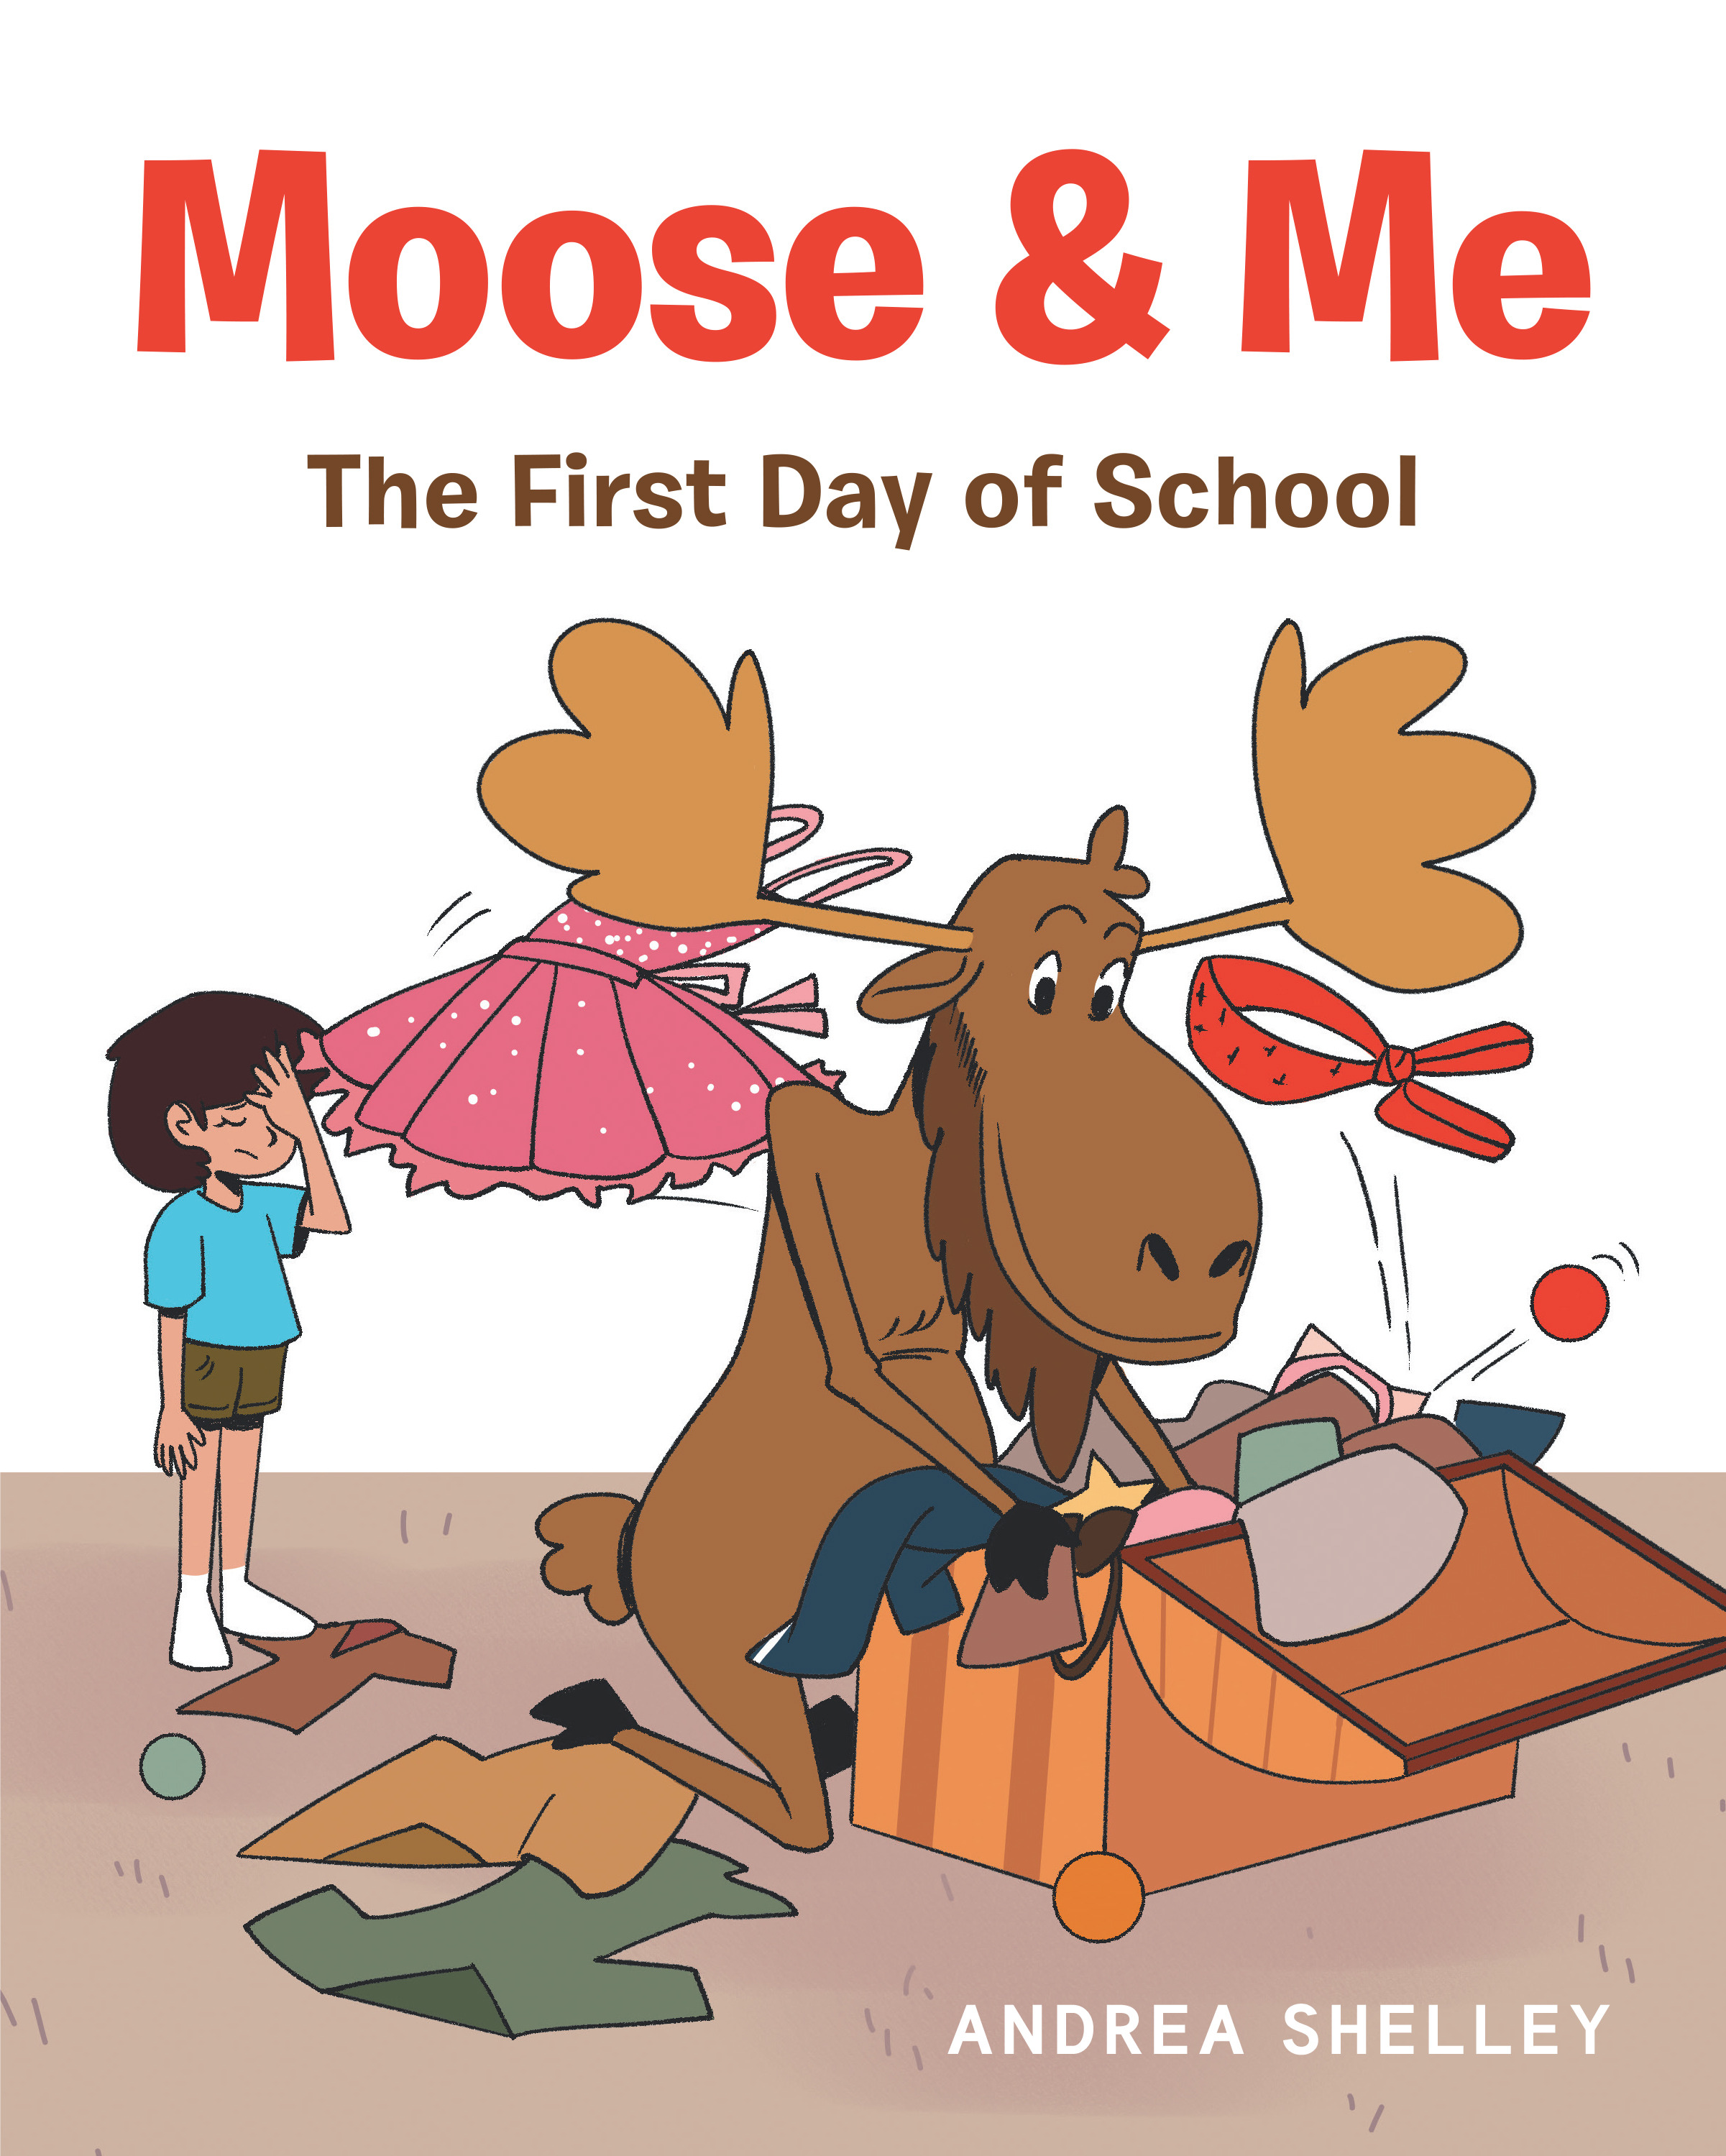 Author Andrea Shelley’s New Book, "Moose & Me: The First Day of School," is a Children’s Book That Addresses the Uncertainty of Going to School for the First Time